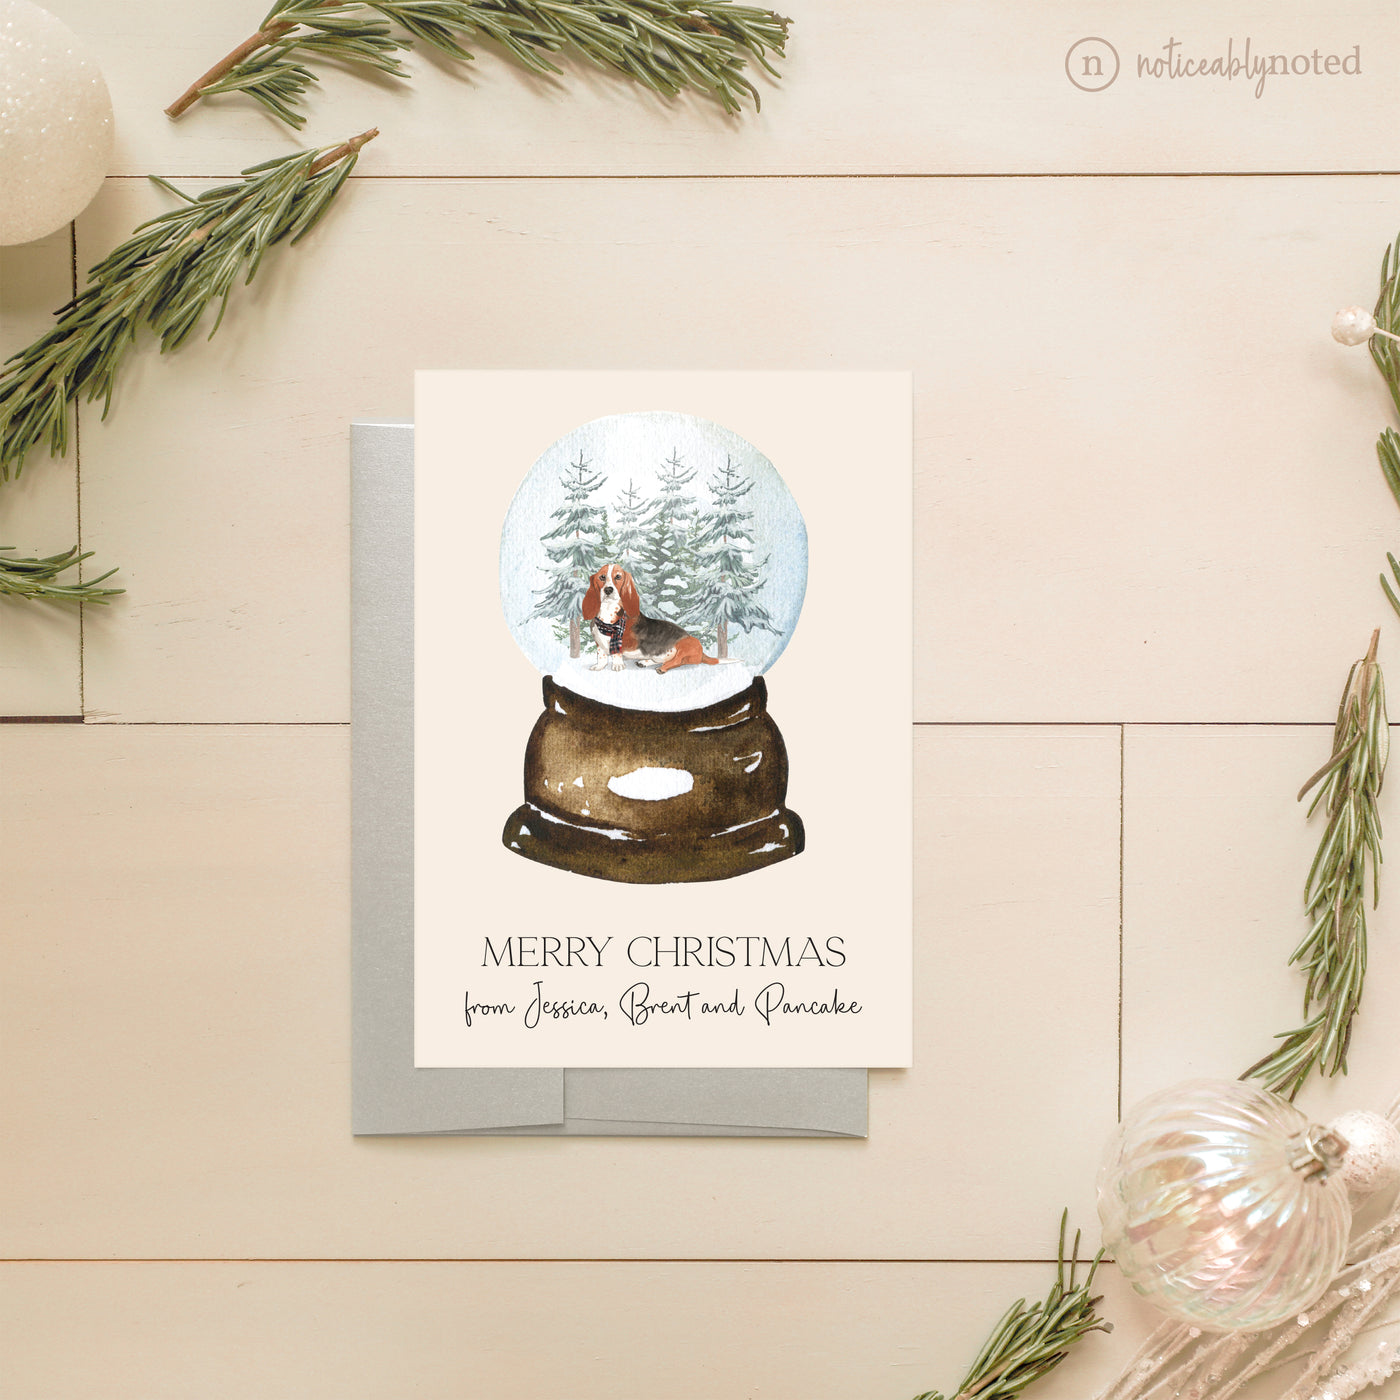 Basset Hound Dog Holiday Card | Noticeably Noted